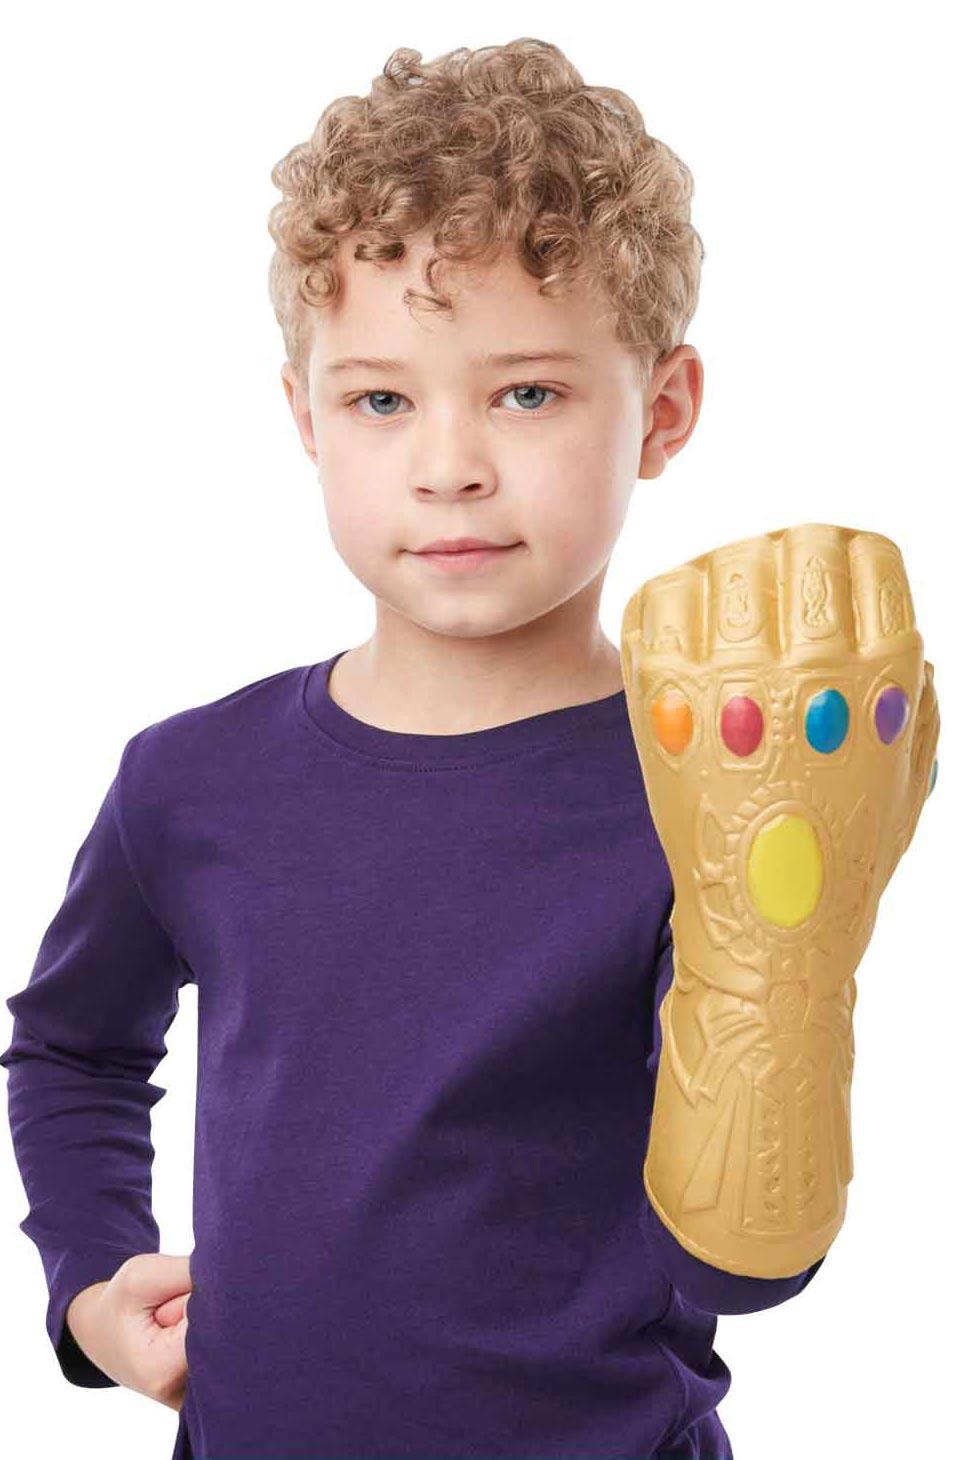 Children's Infinity EVA Gauntlet from Avengers Infinity War by Rubies 200449 available here at Karnival Costumes online party shop